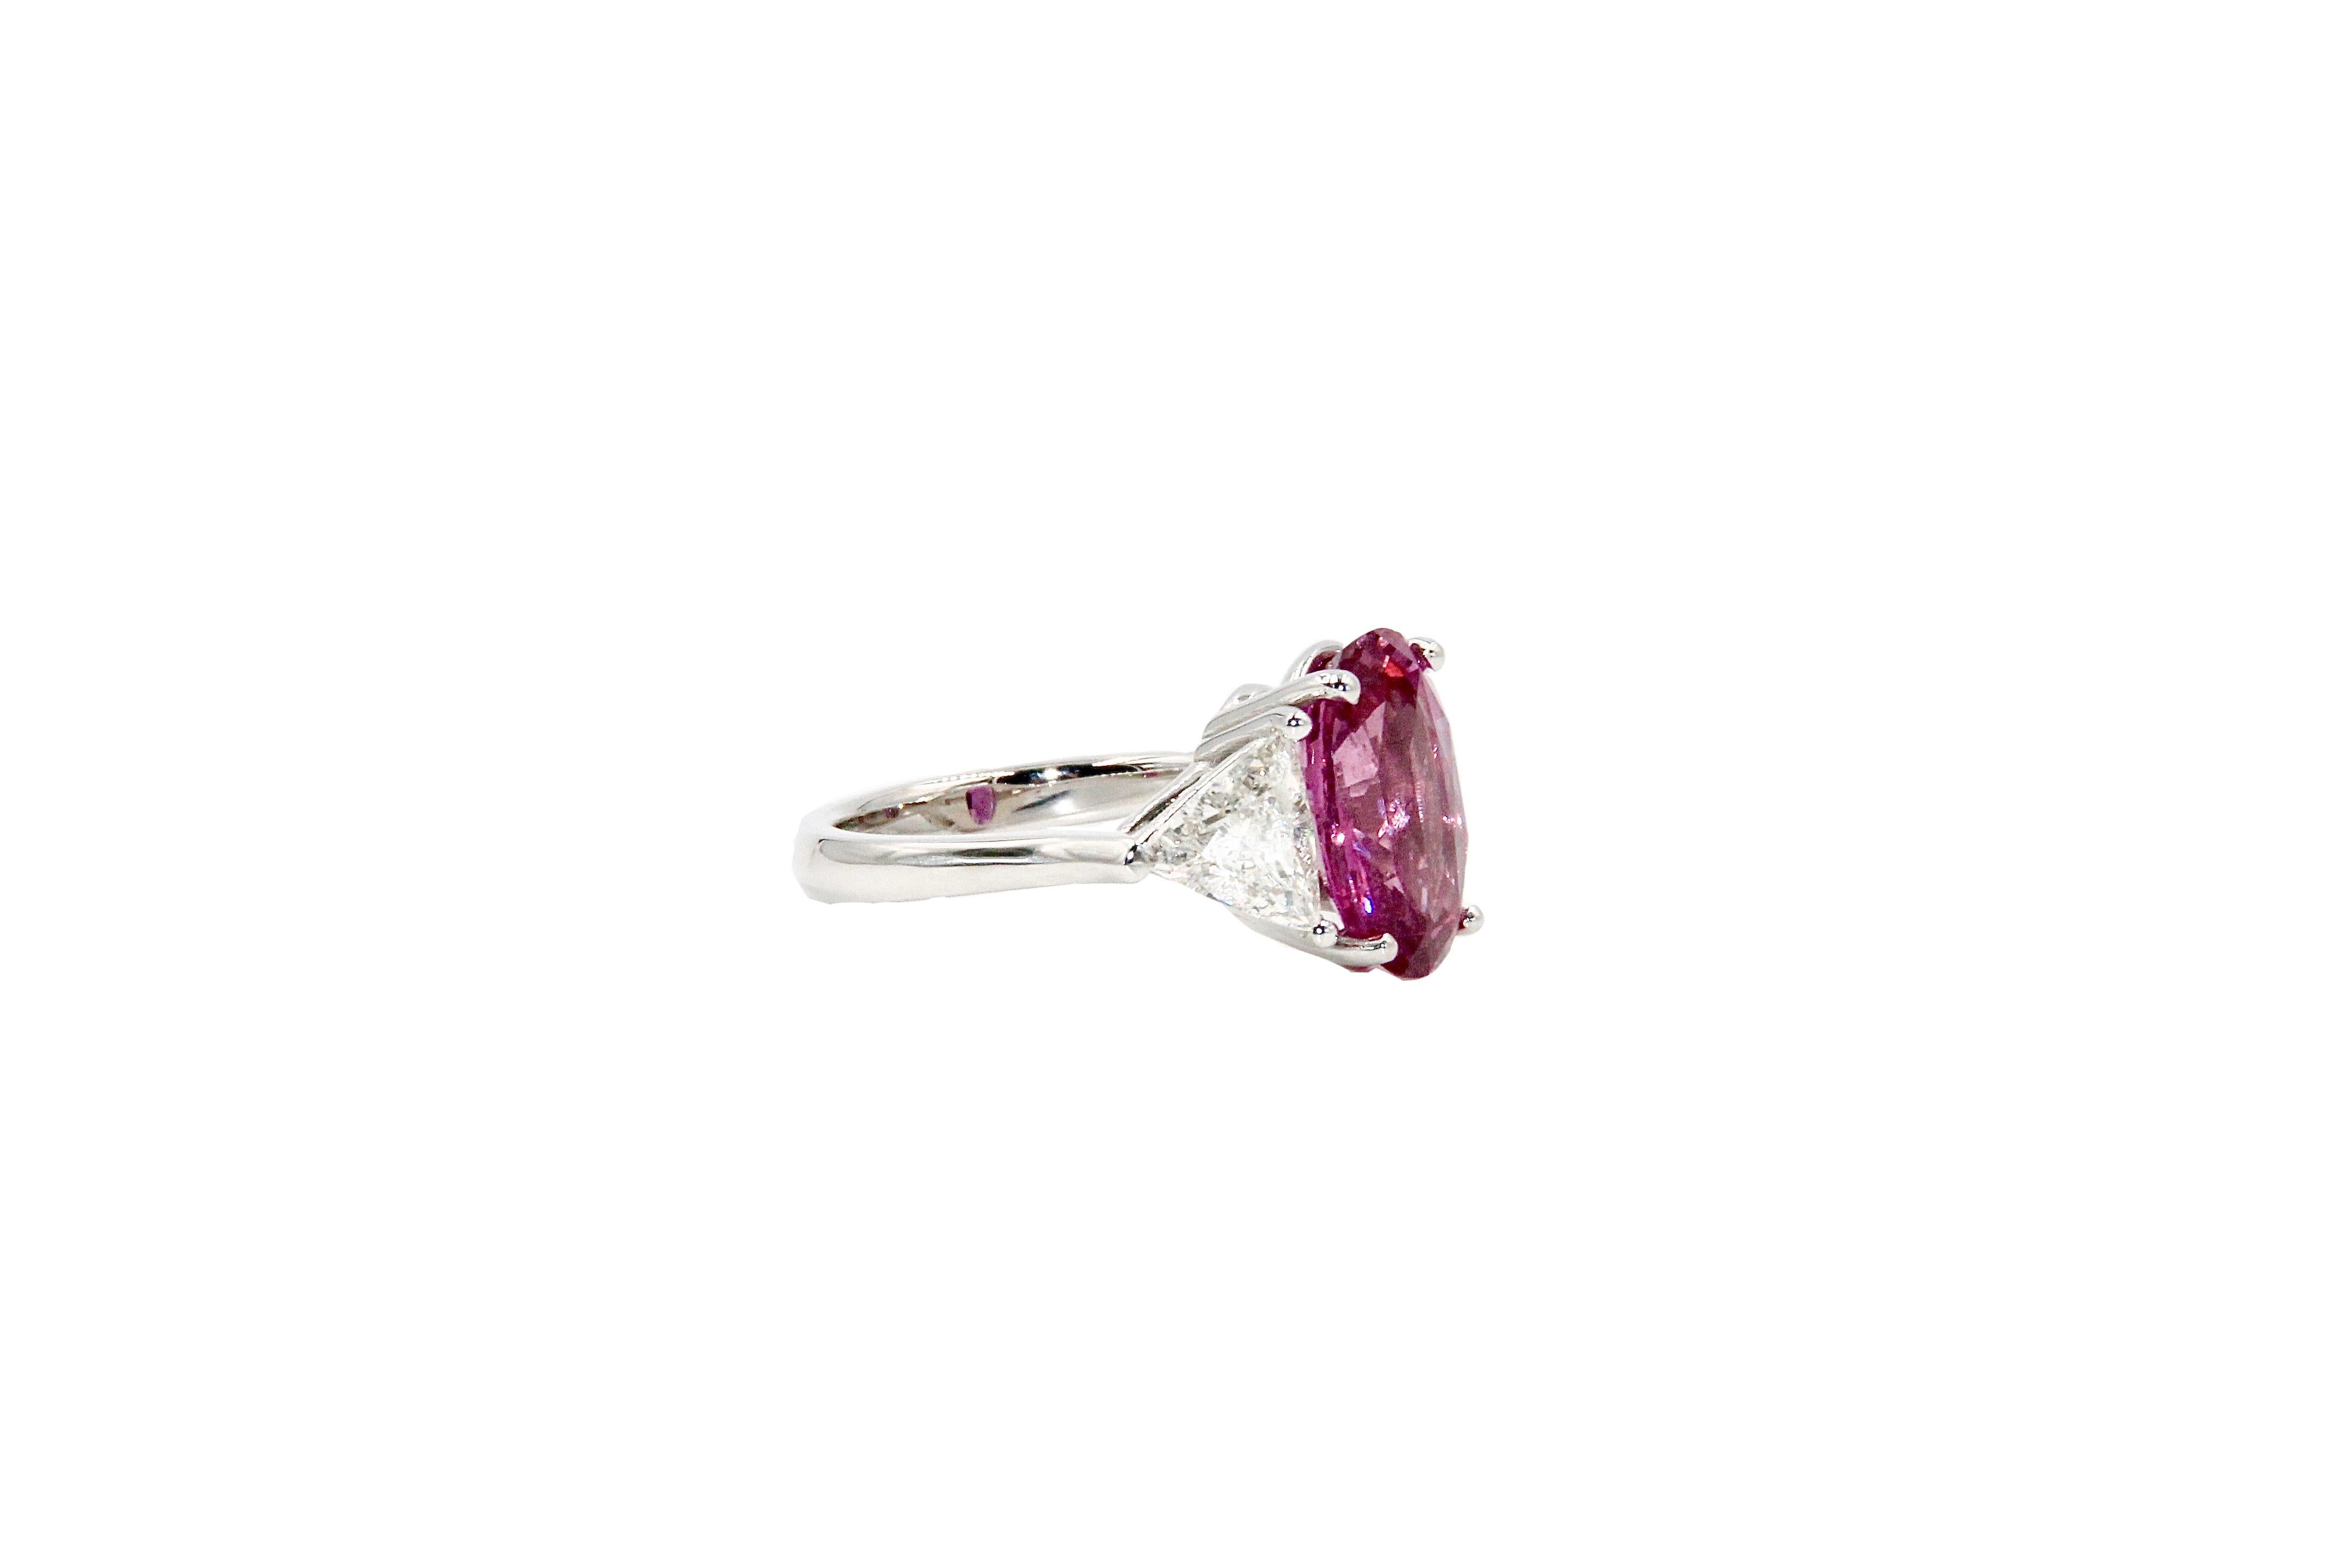 Modern Ceylon Oval Pink Sapphire of 6.57 Carats and Diamond Ring, 'Gold 18k' For Sale